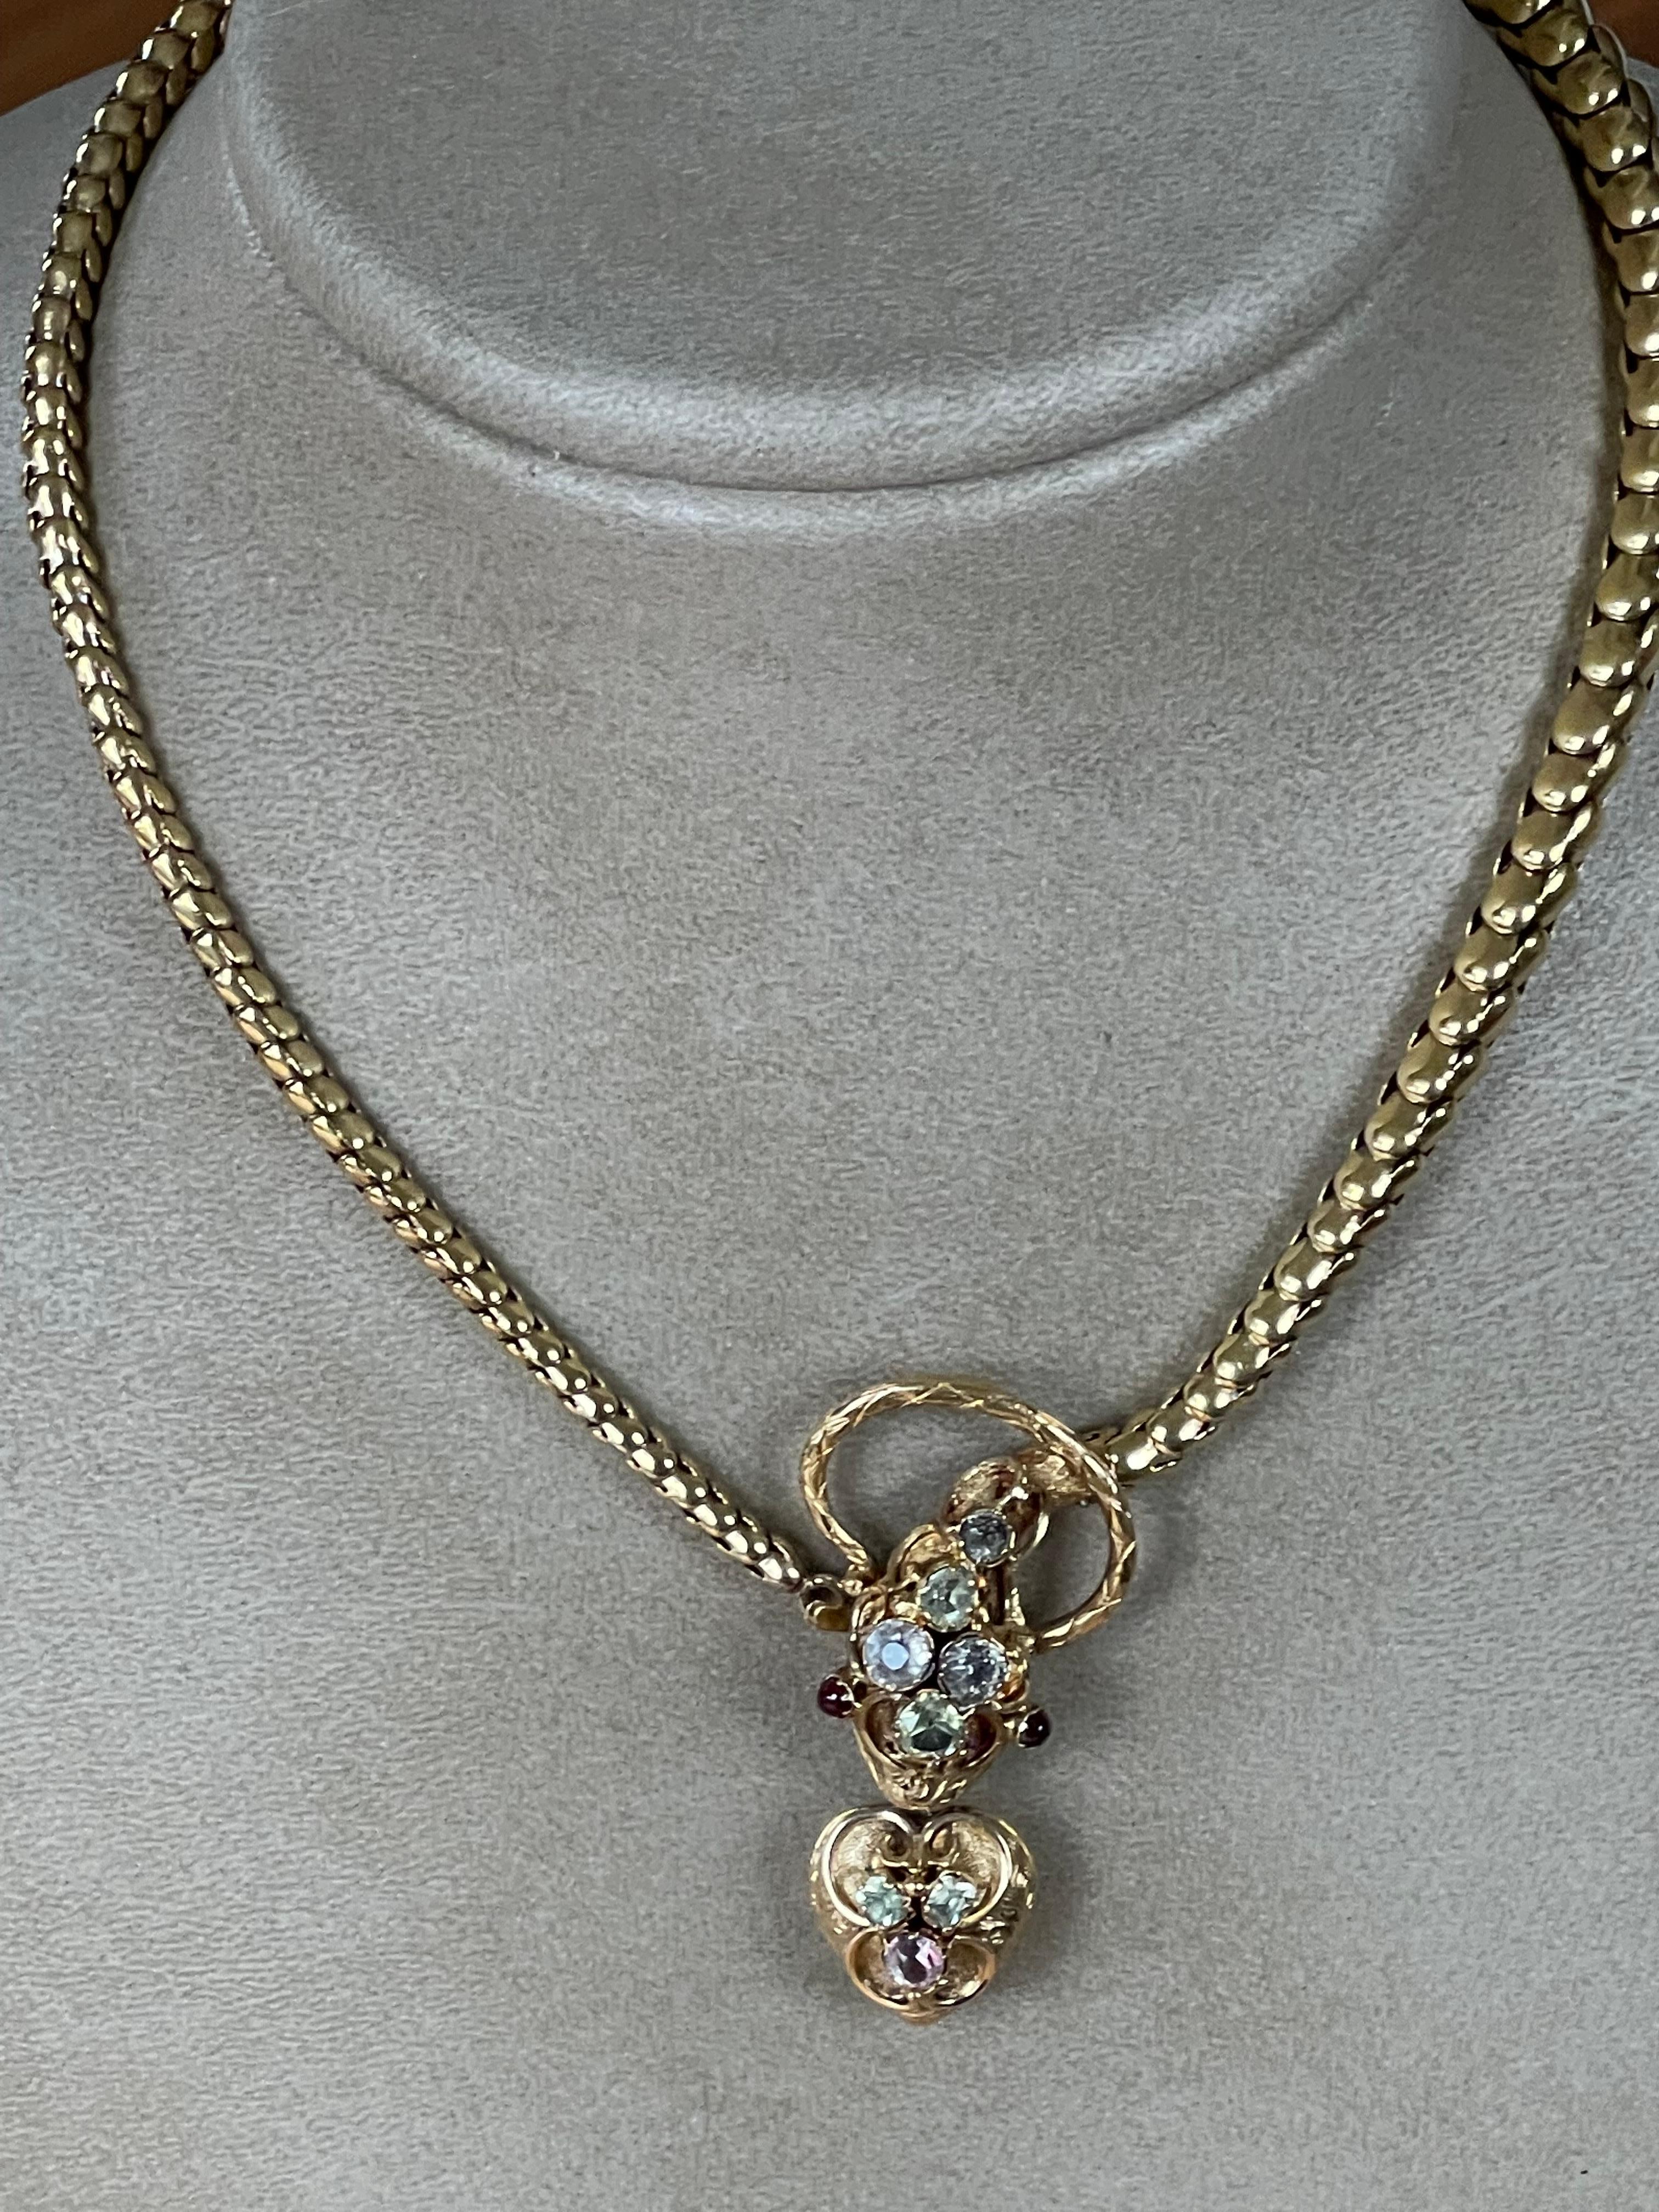 Women's Rare 18 K Yellow Gold Victorian Snake Necklace Colored Stones For Sale